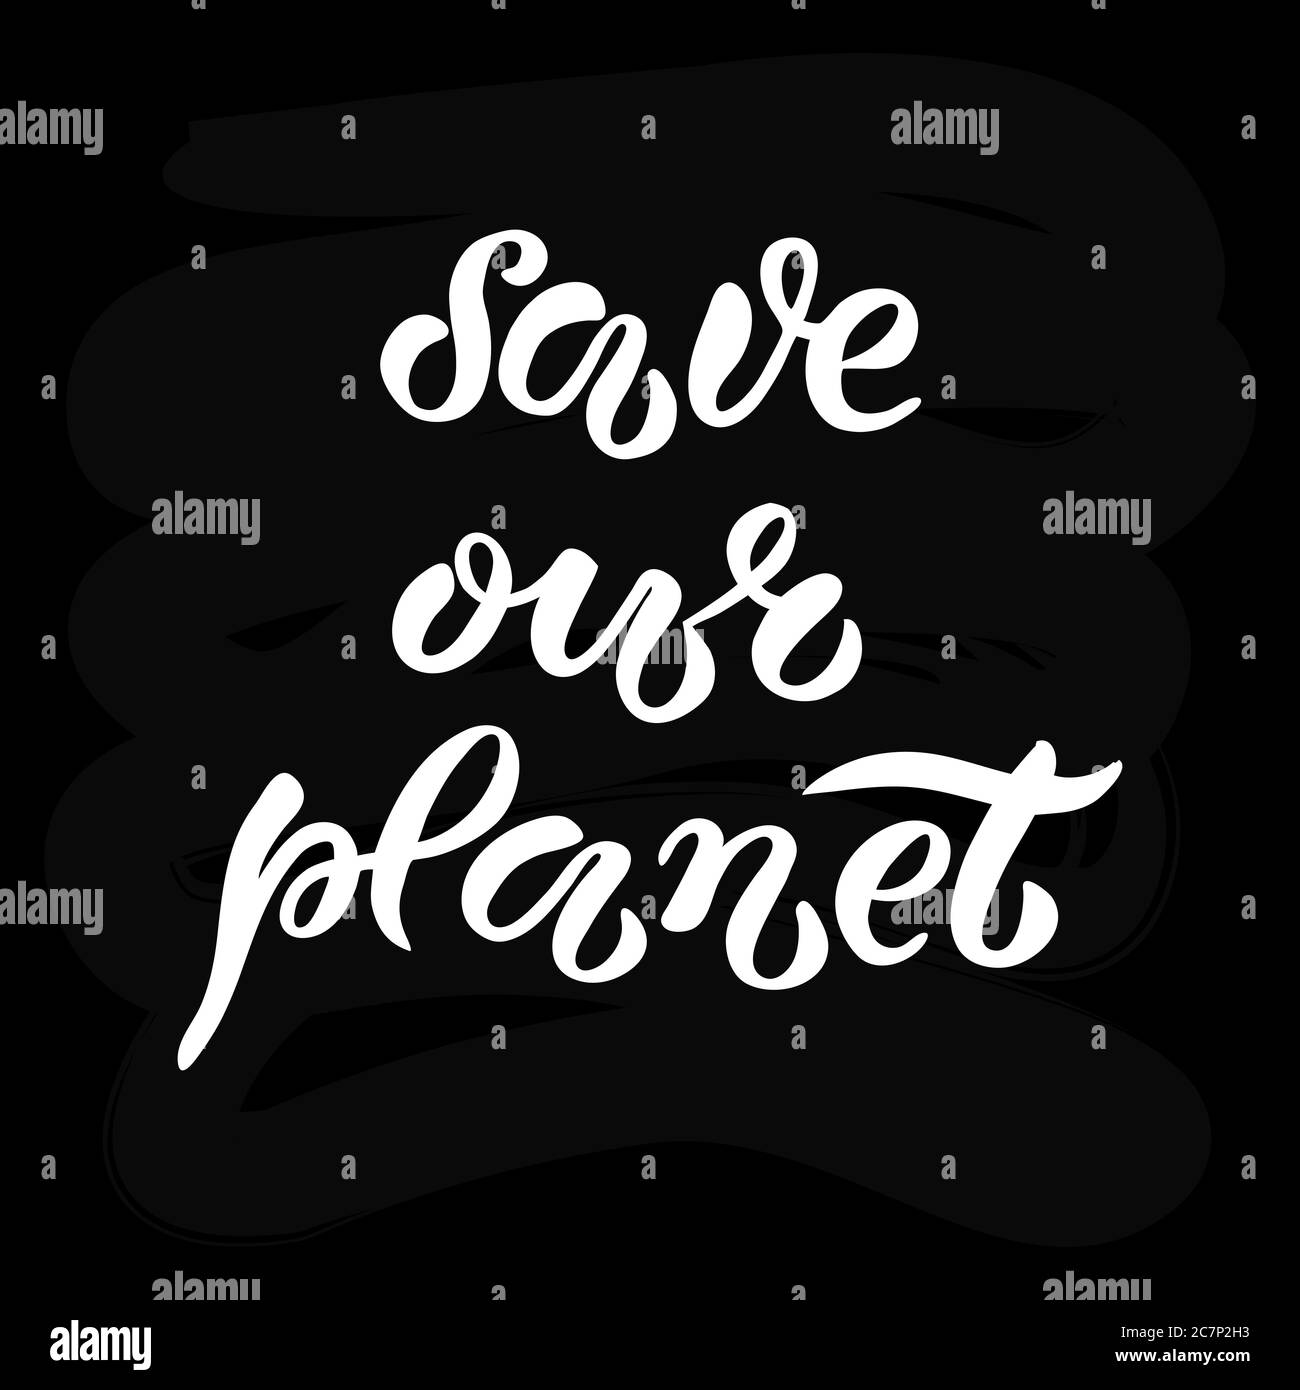 Hand-drawn and digitized lettering 'Save our planet', vector illustration EPS 10. Earth Day poster. Ecology theme illustration. Motivational text, drawn typography badge, card, postcard, banner, tag, logo.. Stock Vector